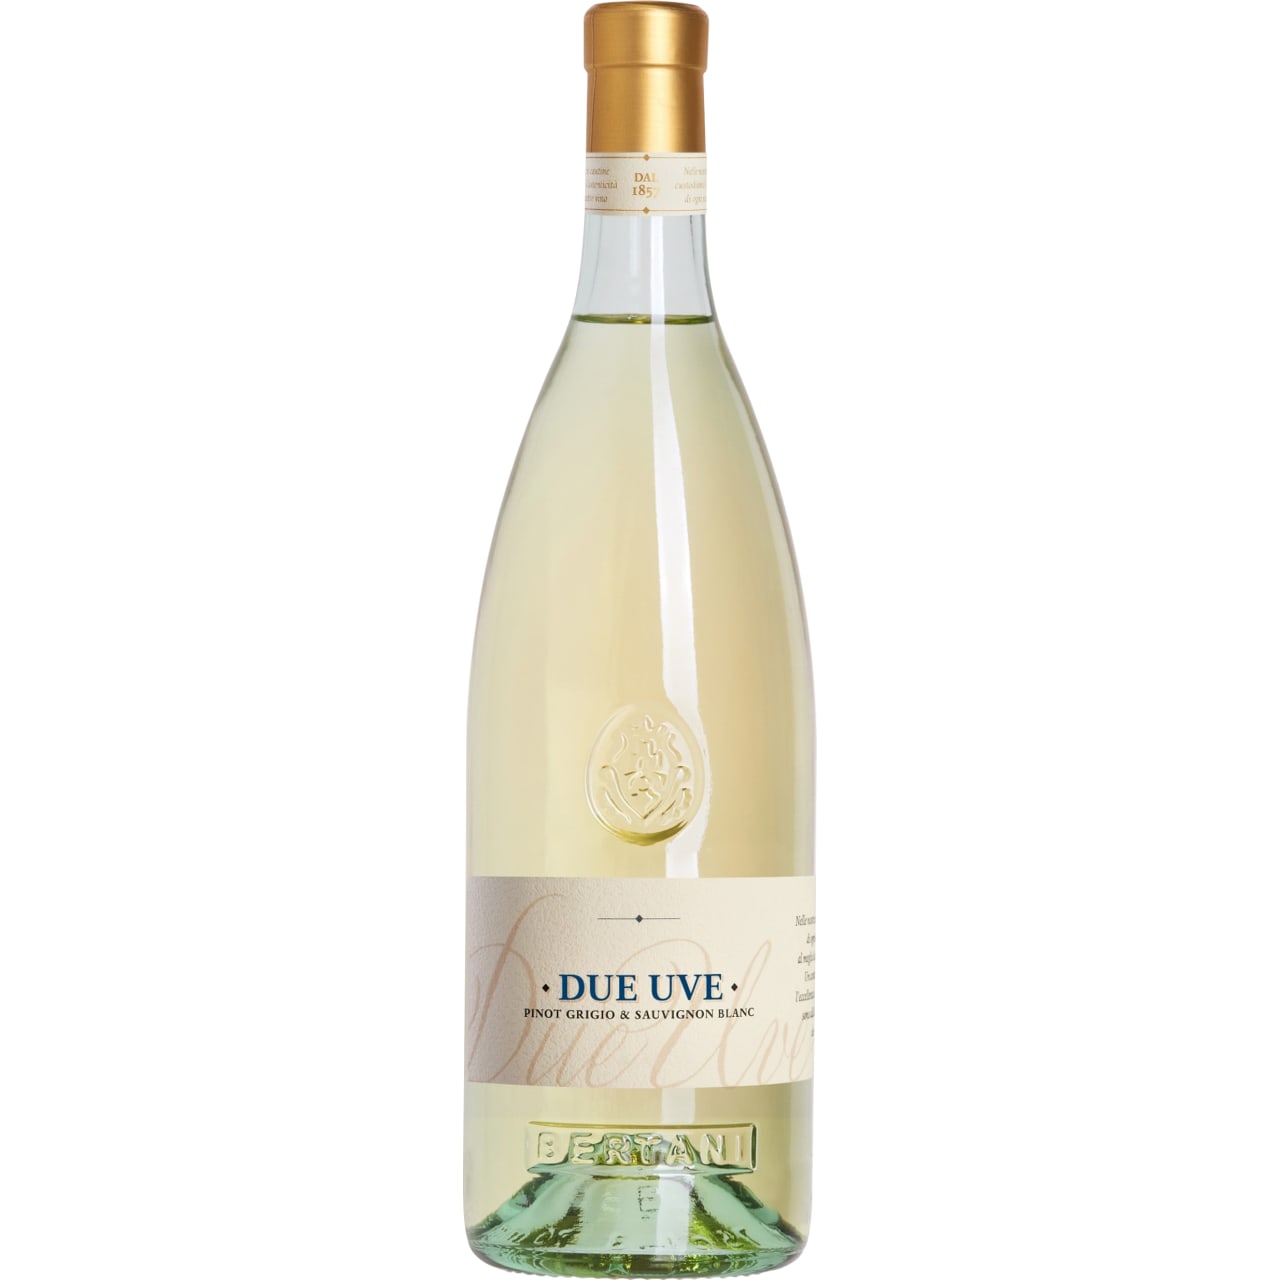 Due Uve Bianco combines the body and elegance of Pinot Grigio with the aromatic notes typical of Sauvignon Blanc.